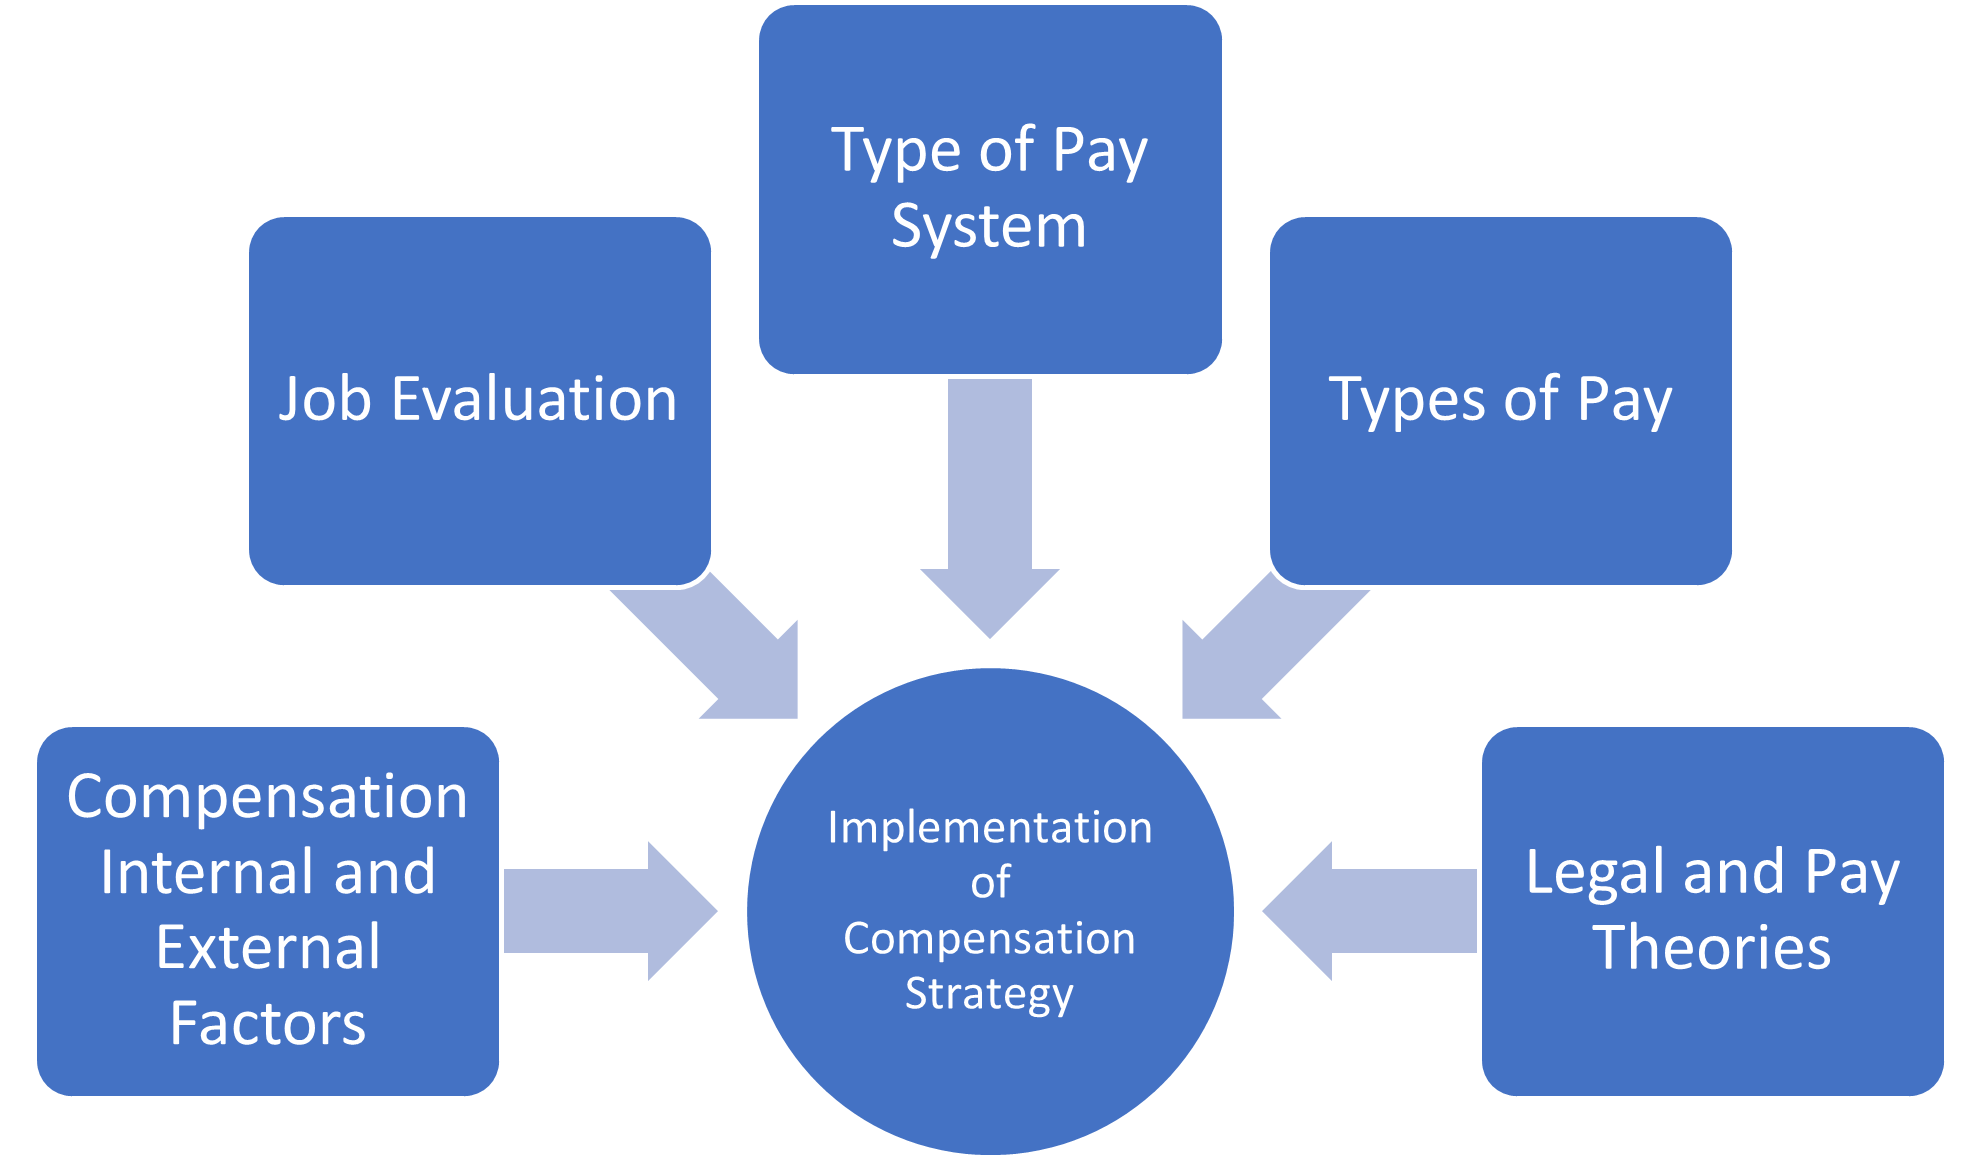 Implementation of Compensation Strategy is comprised of 5 parts -1. Compensation Internal and External Factors, 2. Job evaluation 3. type of pay system, 4. types of pay and 5. legal and pay theories